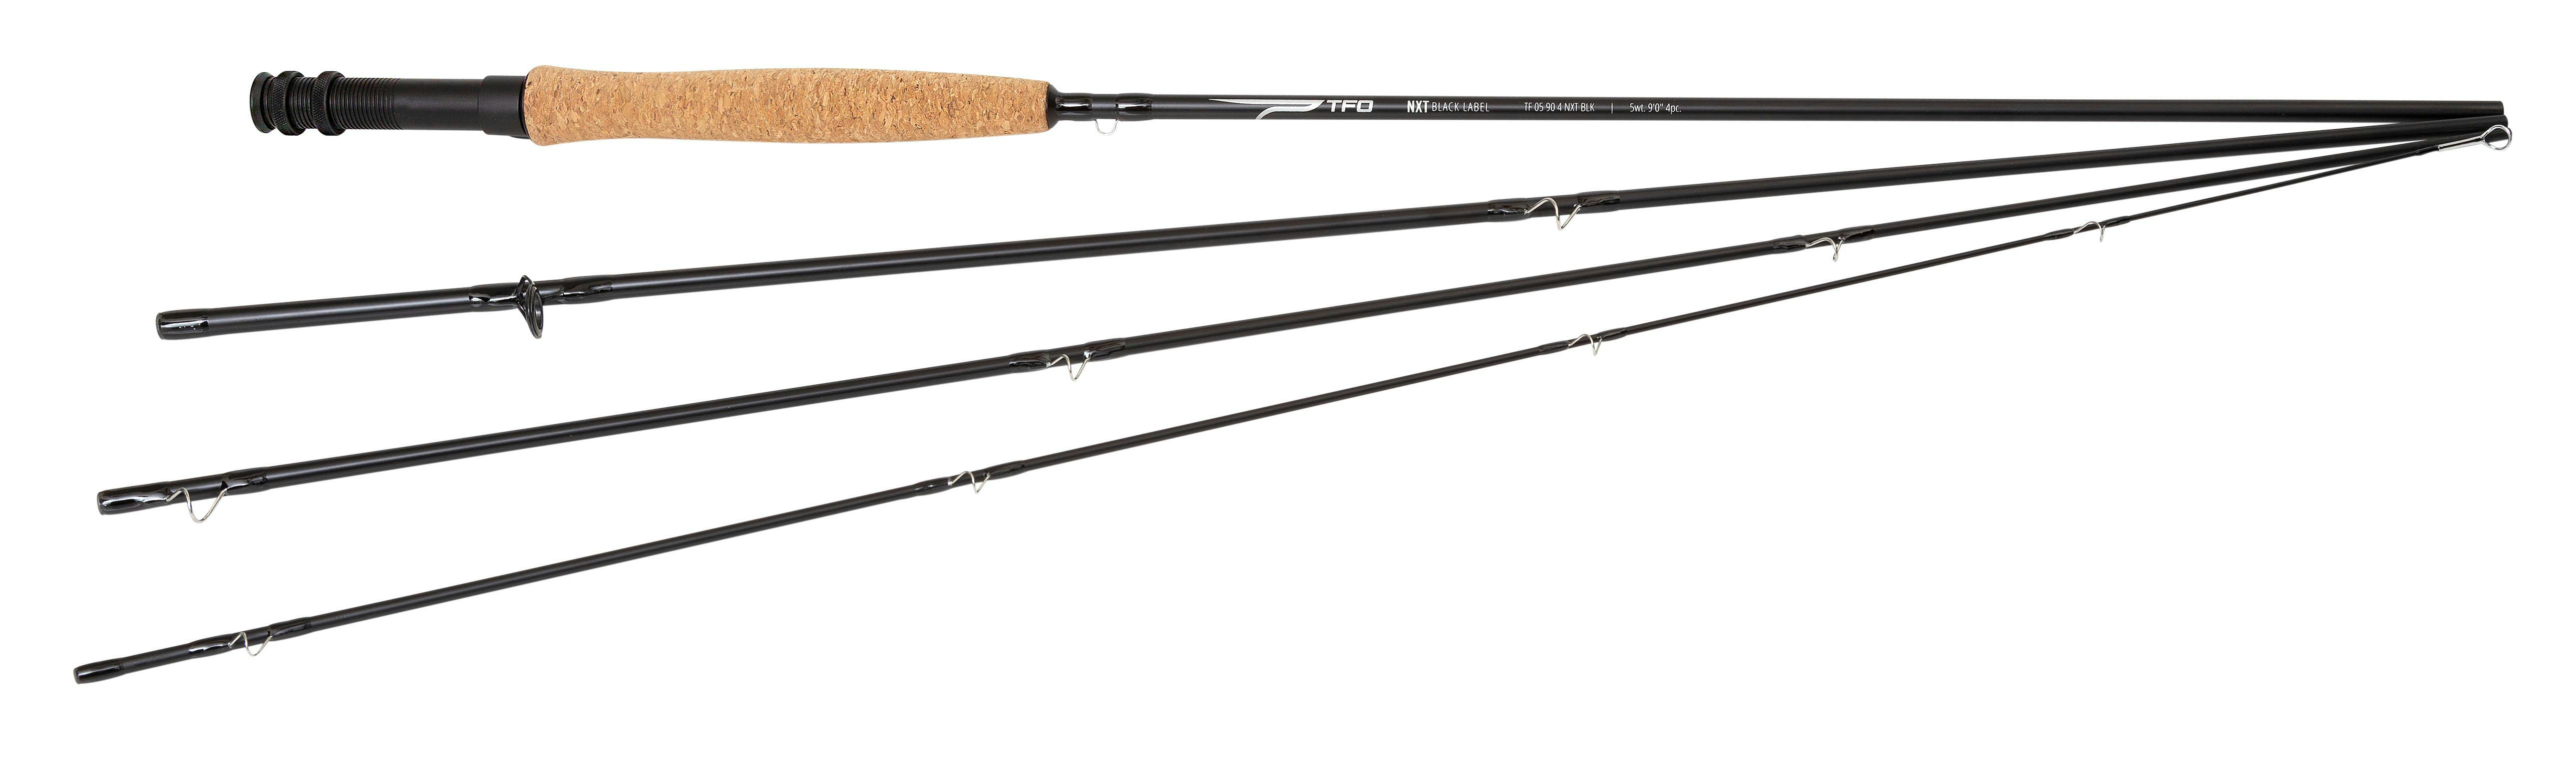 Temple Fork Outfitters Fly Fishing Rod NXT 8'6 4/5wt. 4pc